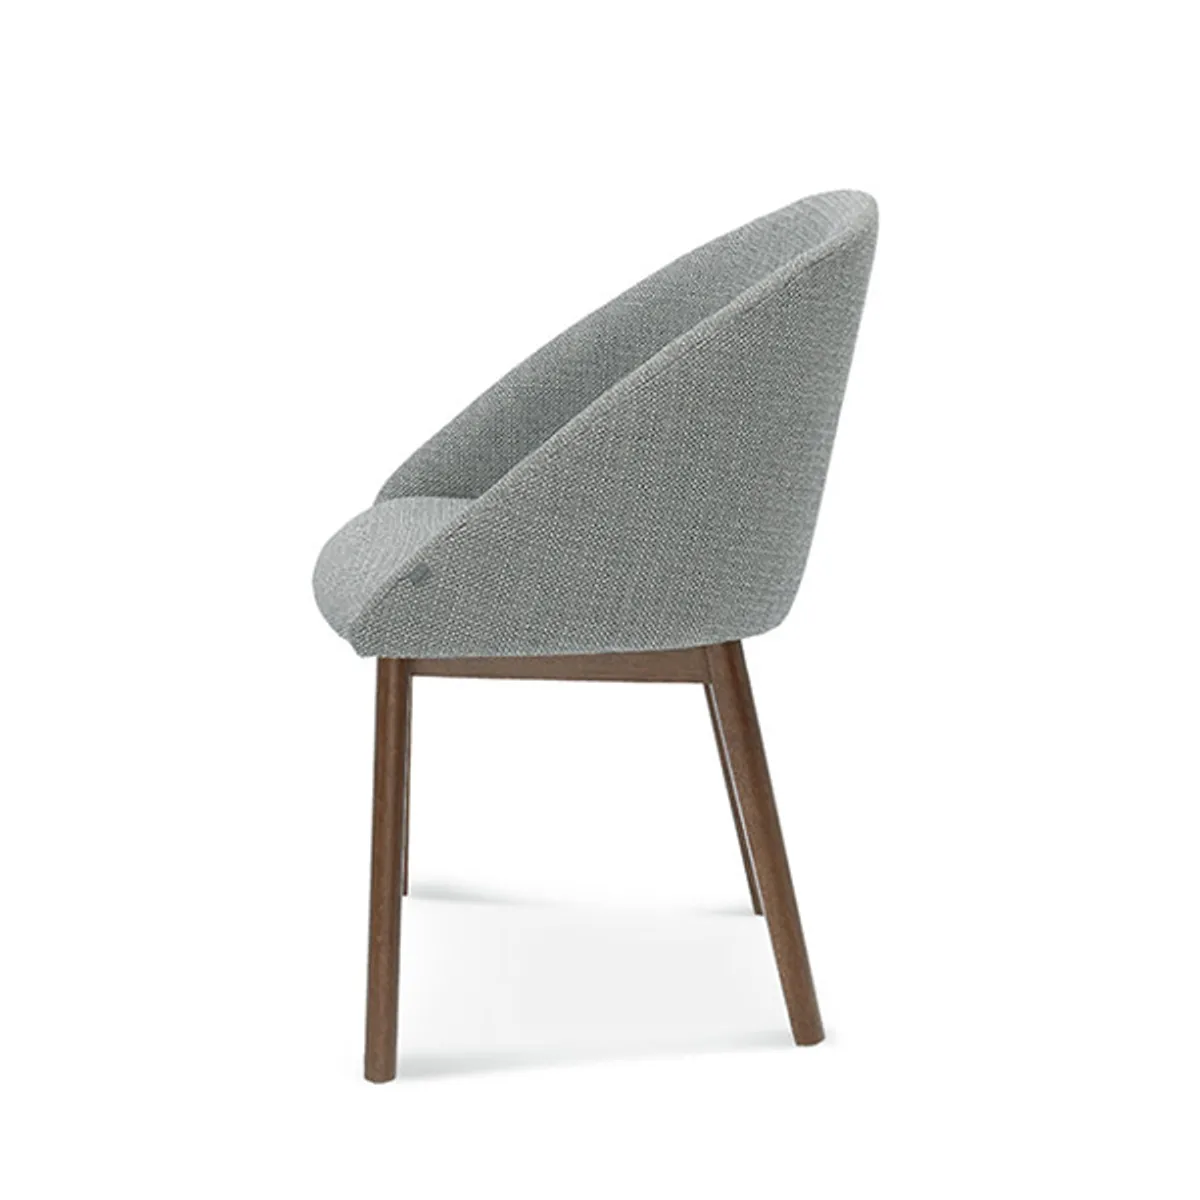 Luca Chair Upholstered For Commercial Use By Insideoutcontracts 024